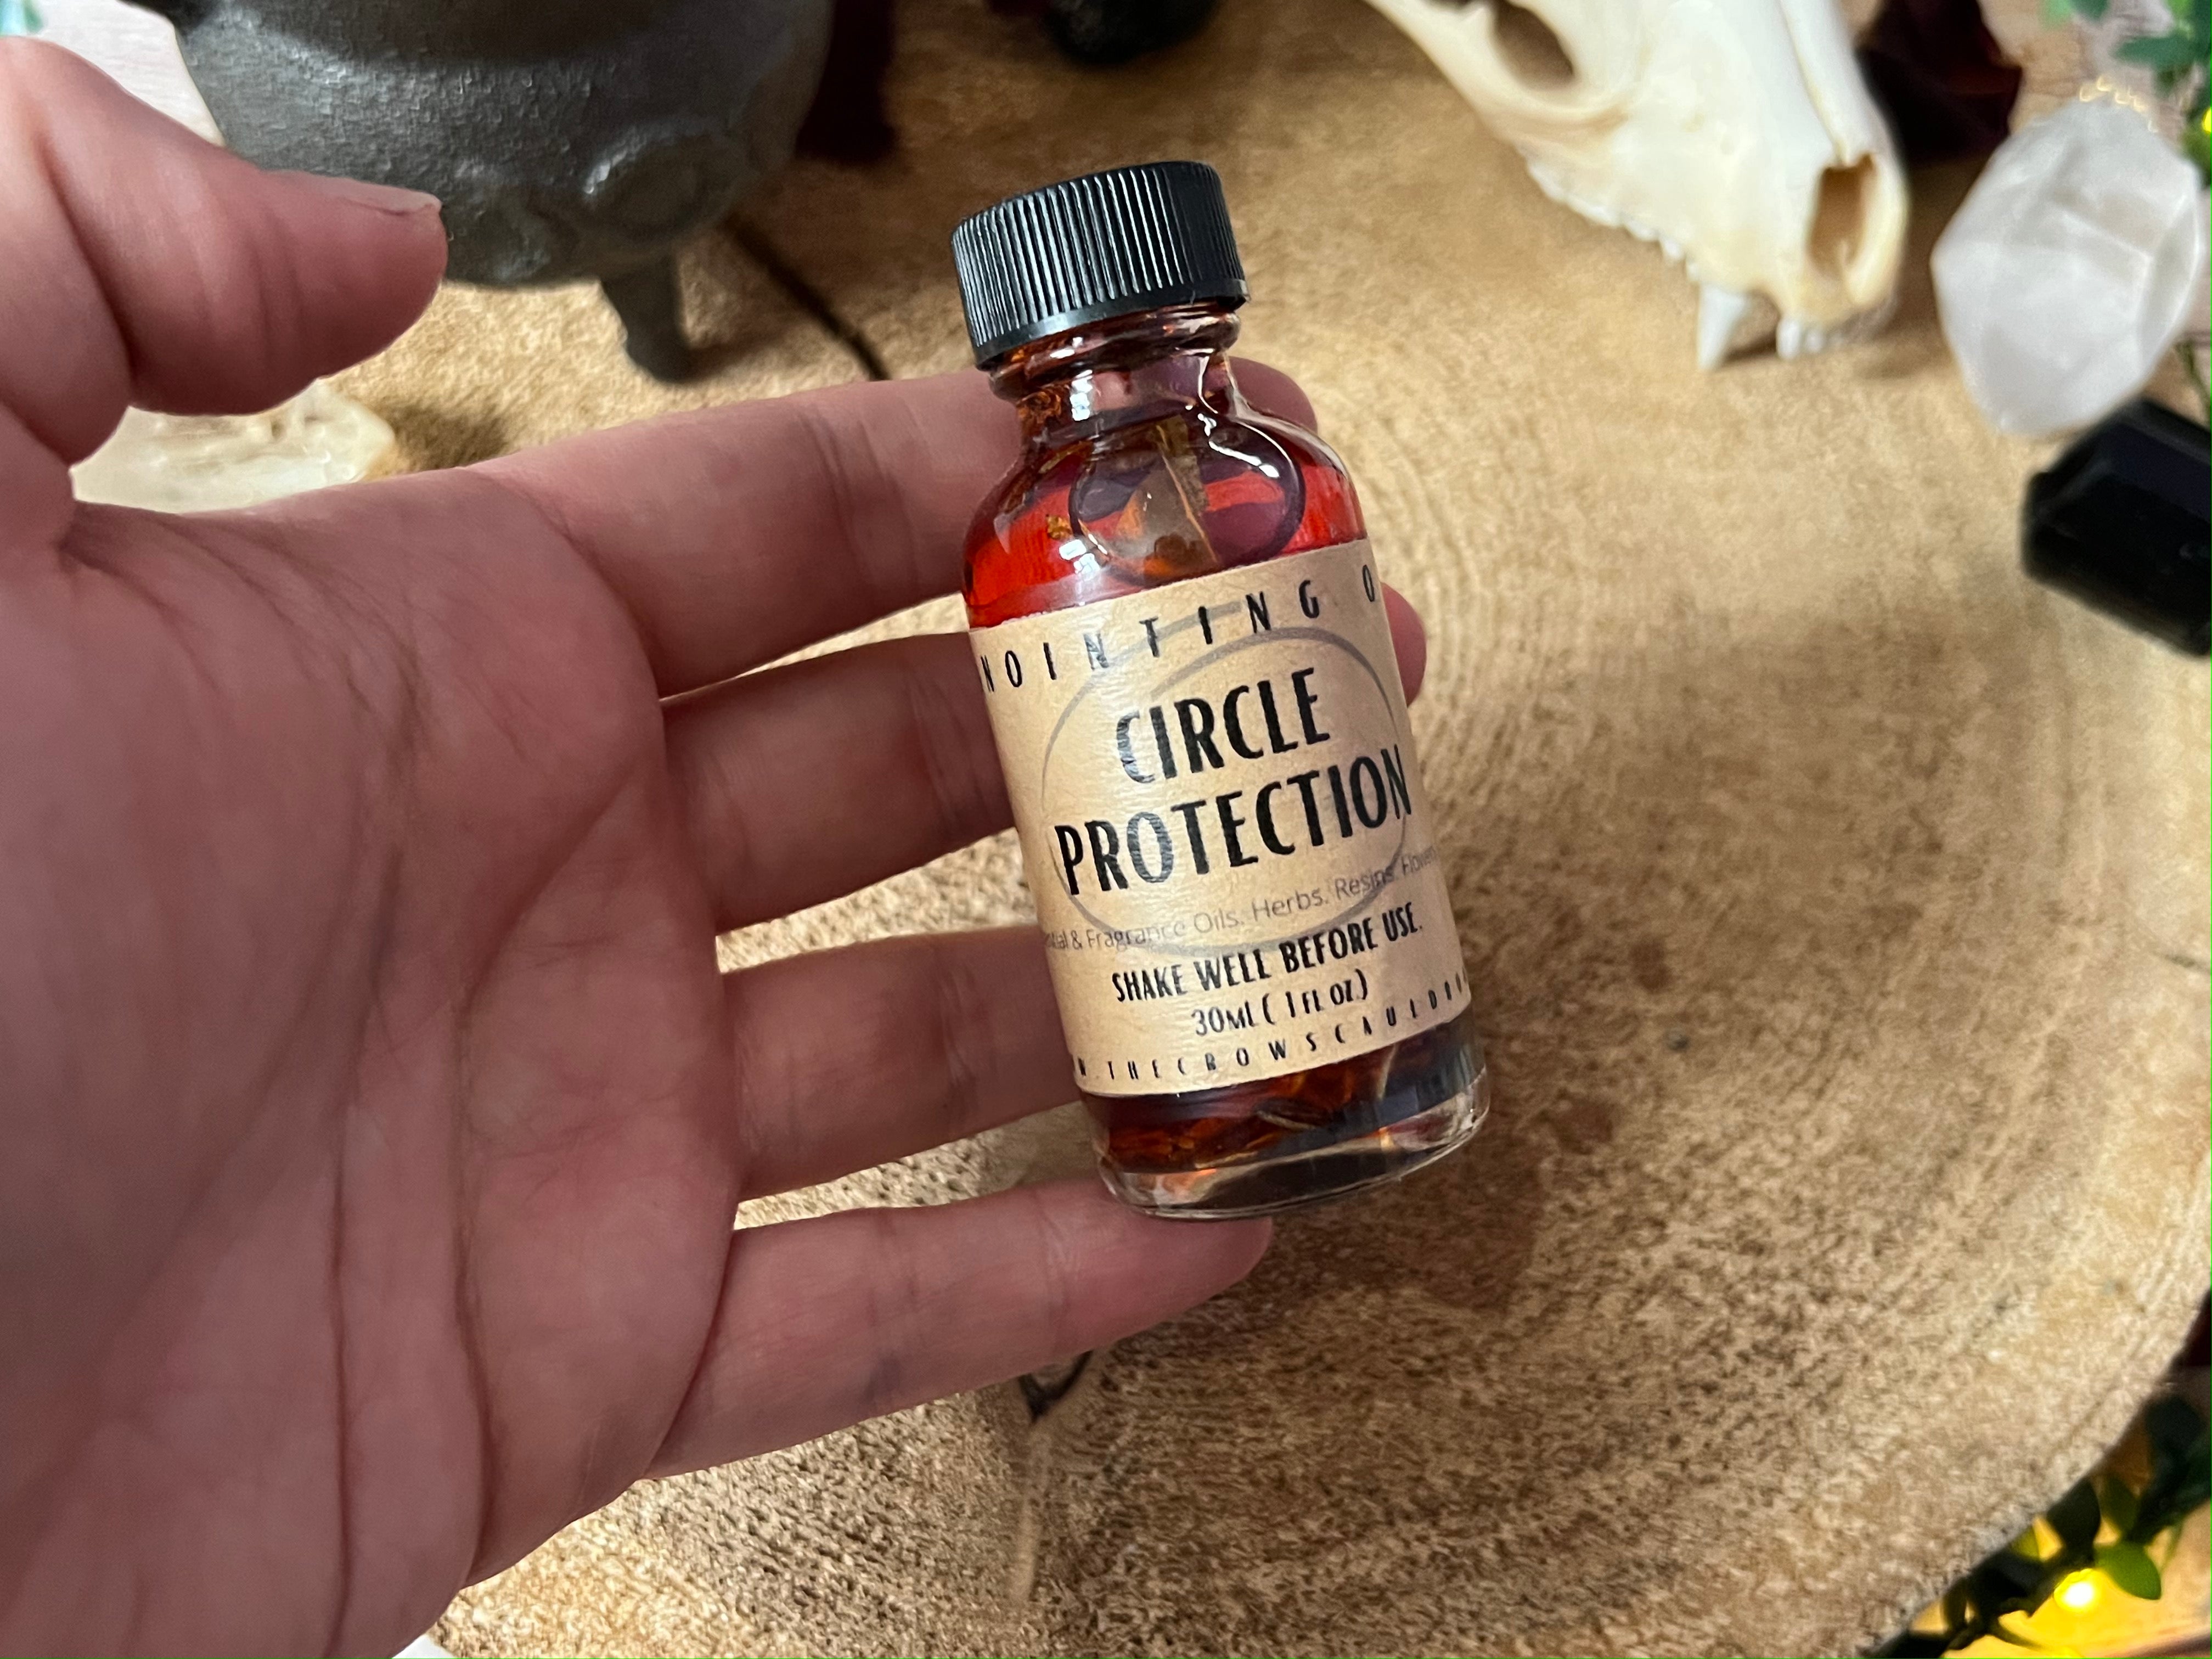 Circle Protection- Conjure Oil